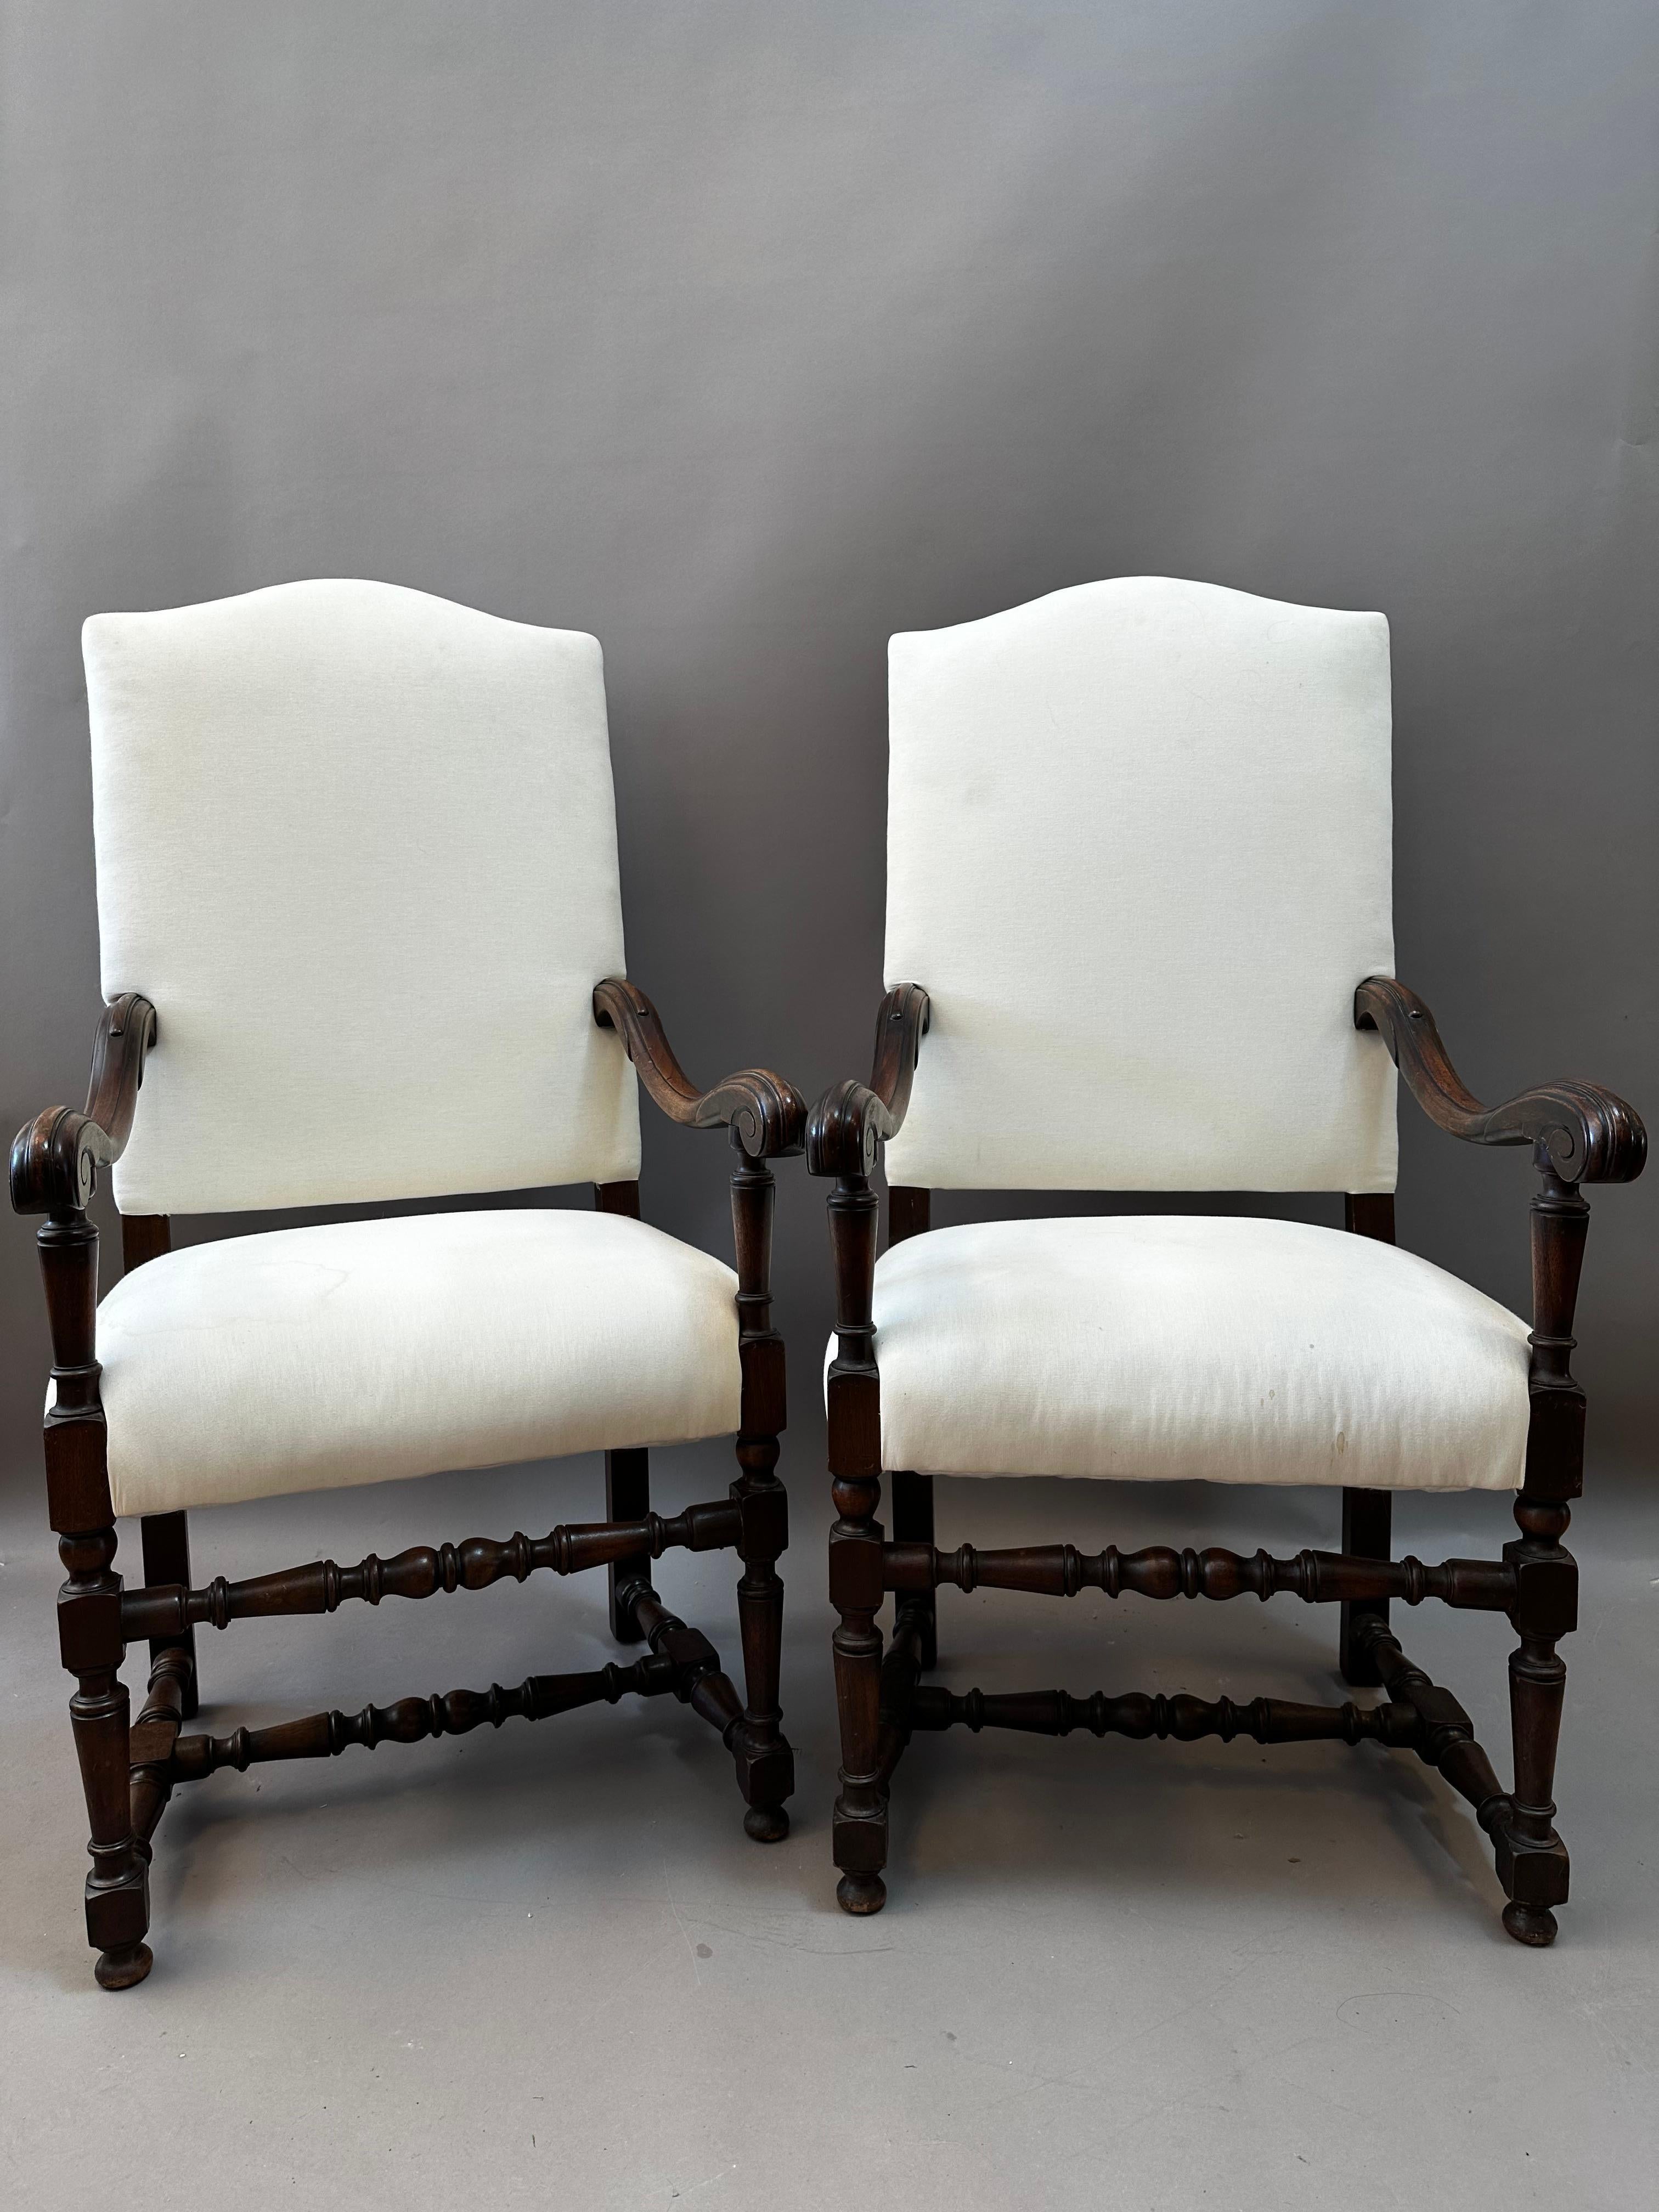 Pair of Louis XIV Period 17th Century Armchairs For Sale 4